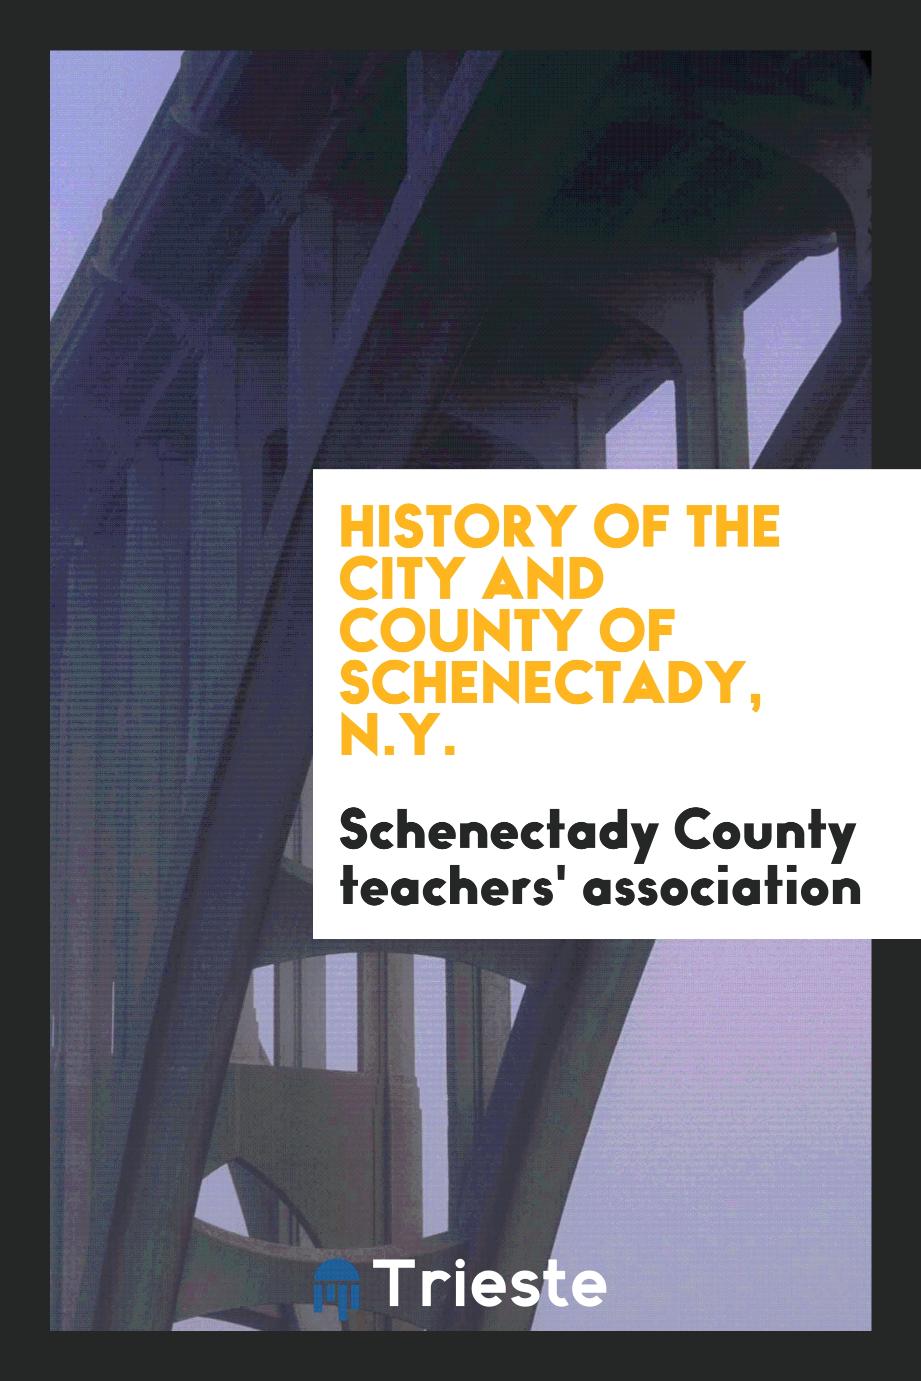 History of the city and county of Schenectady, N.Y.